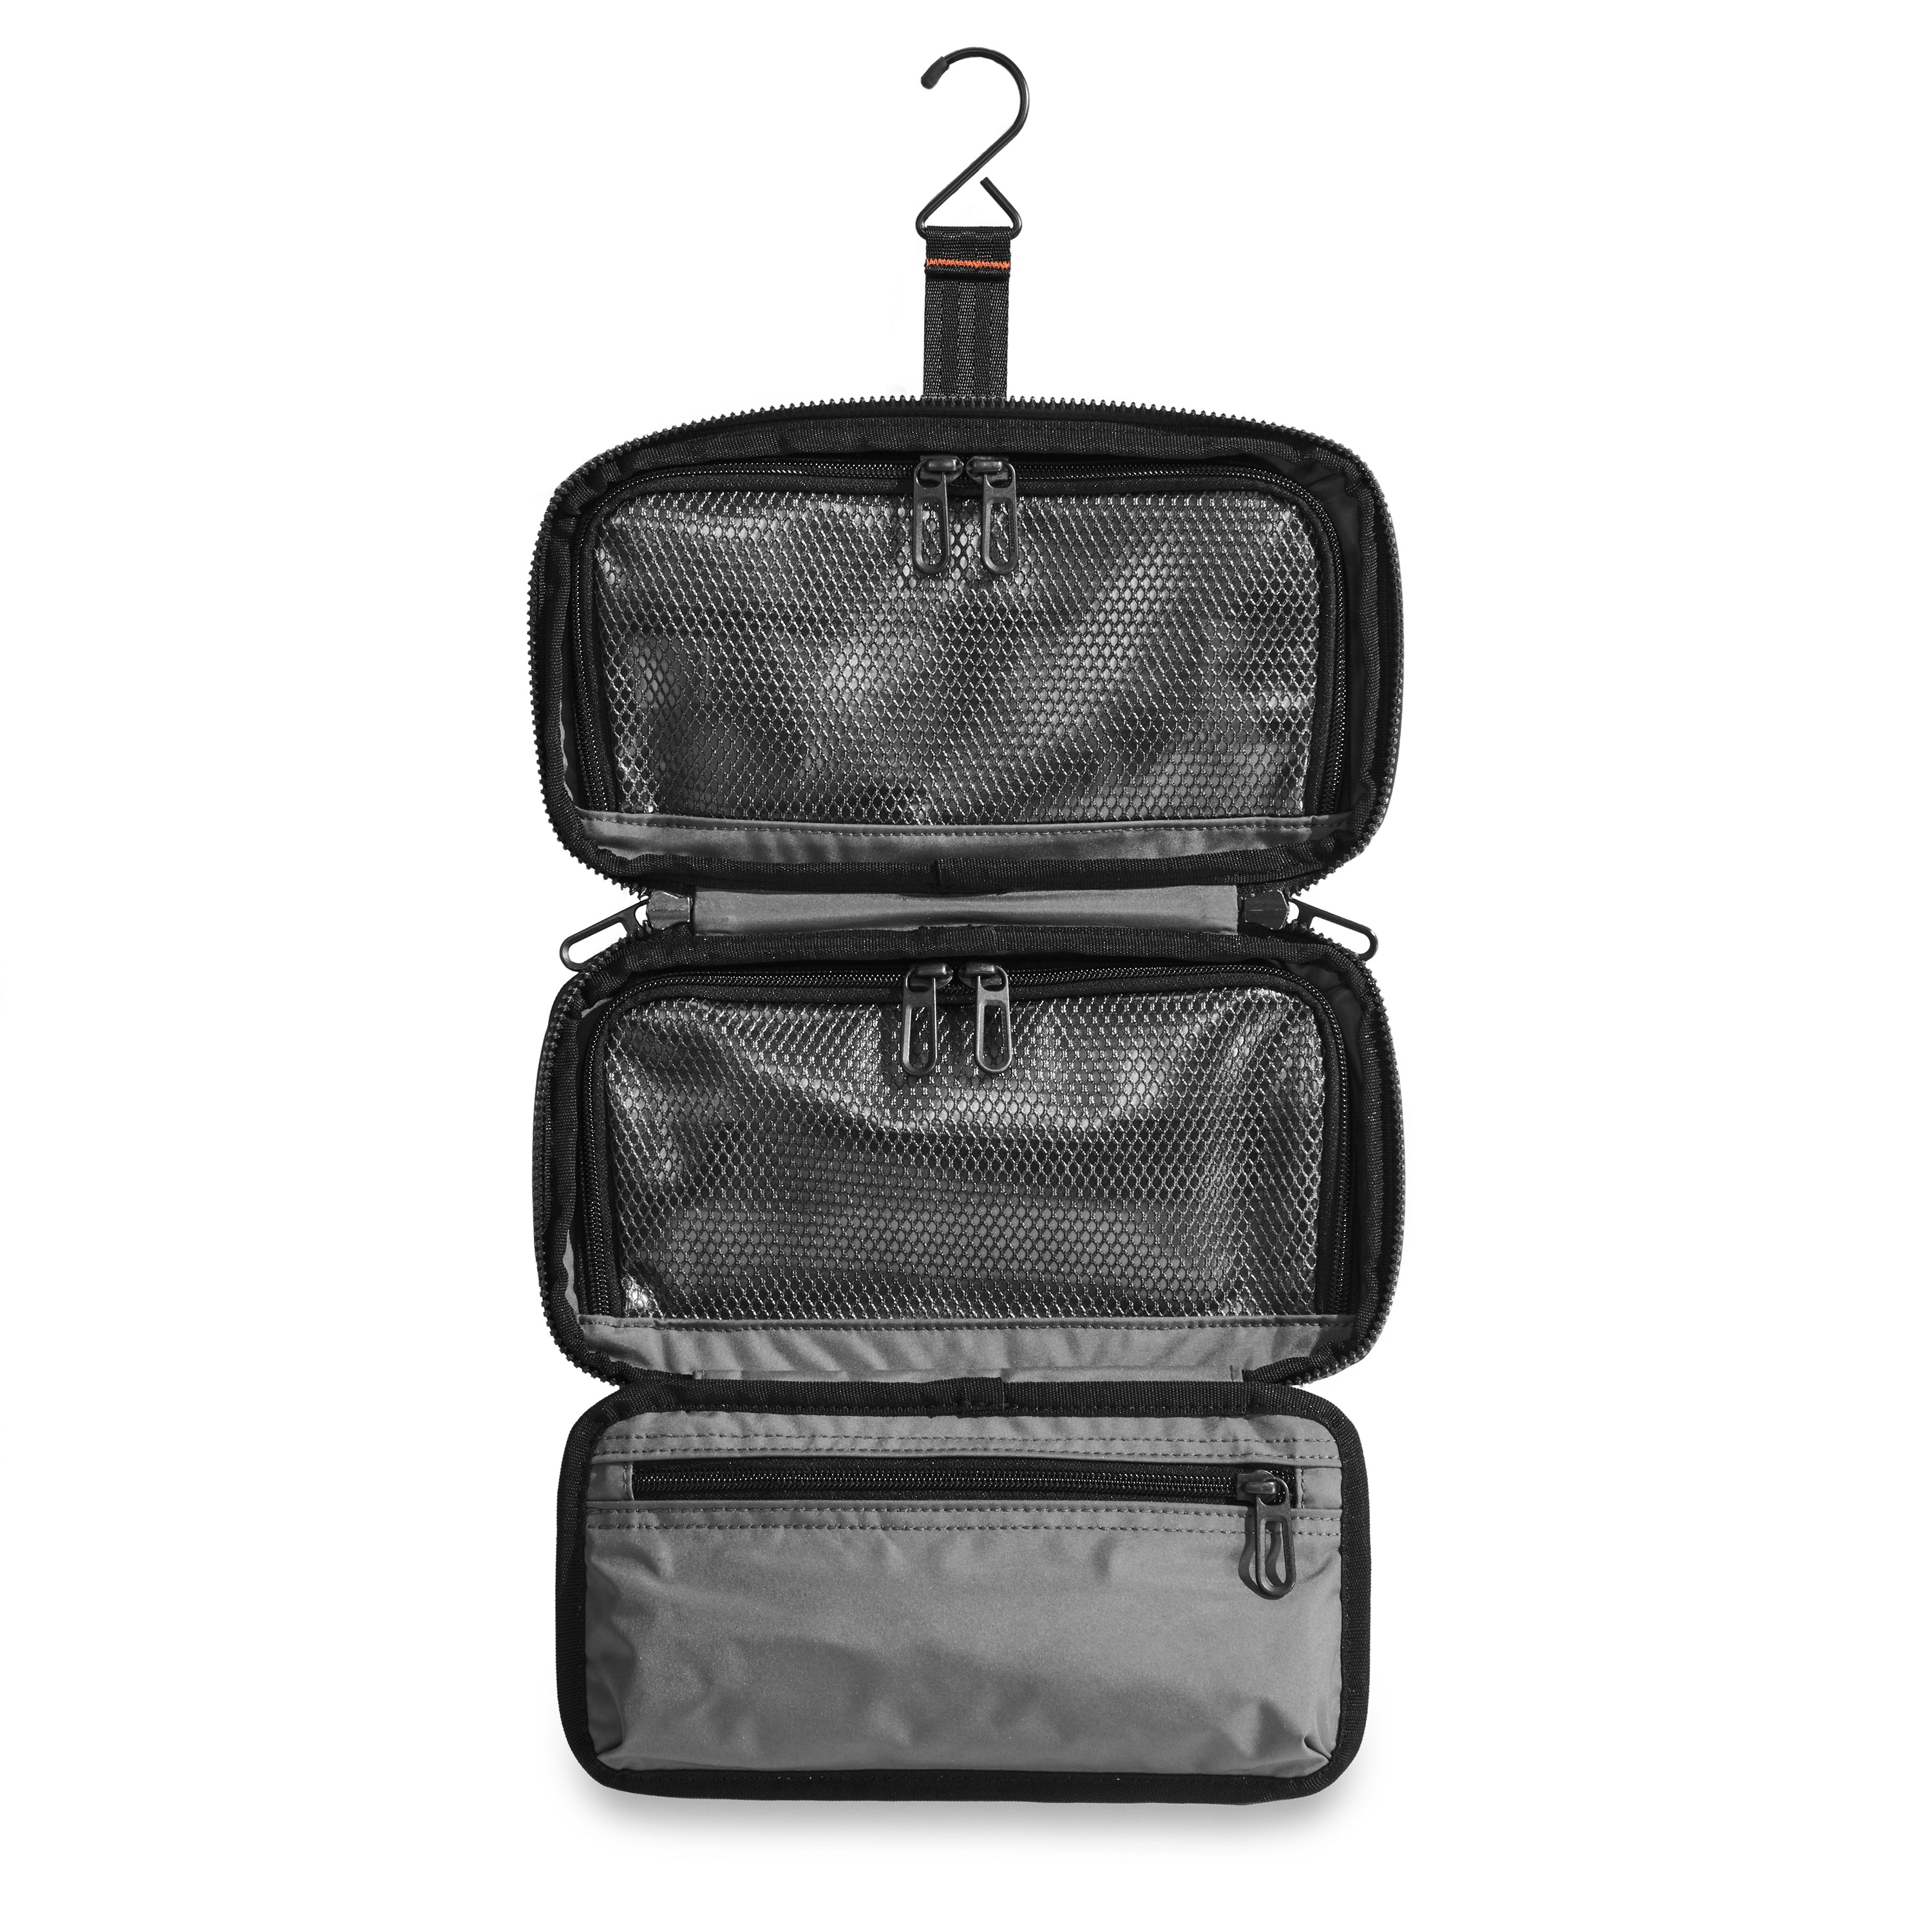 Hanging Toiletry Bag, Travel Accessories